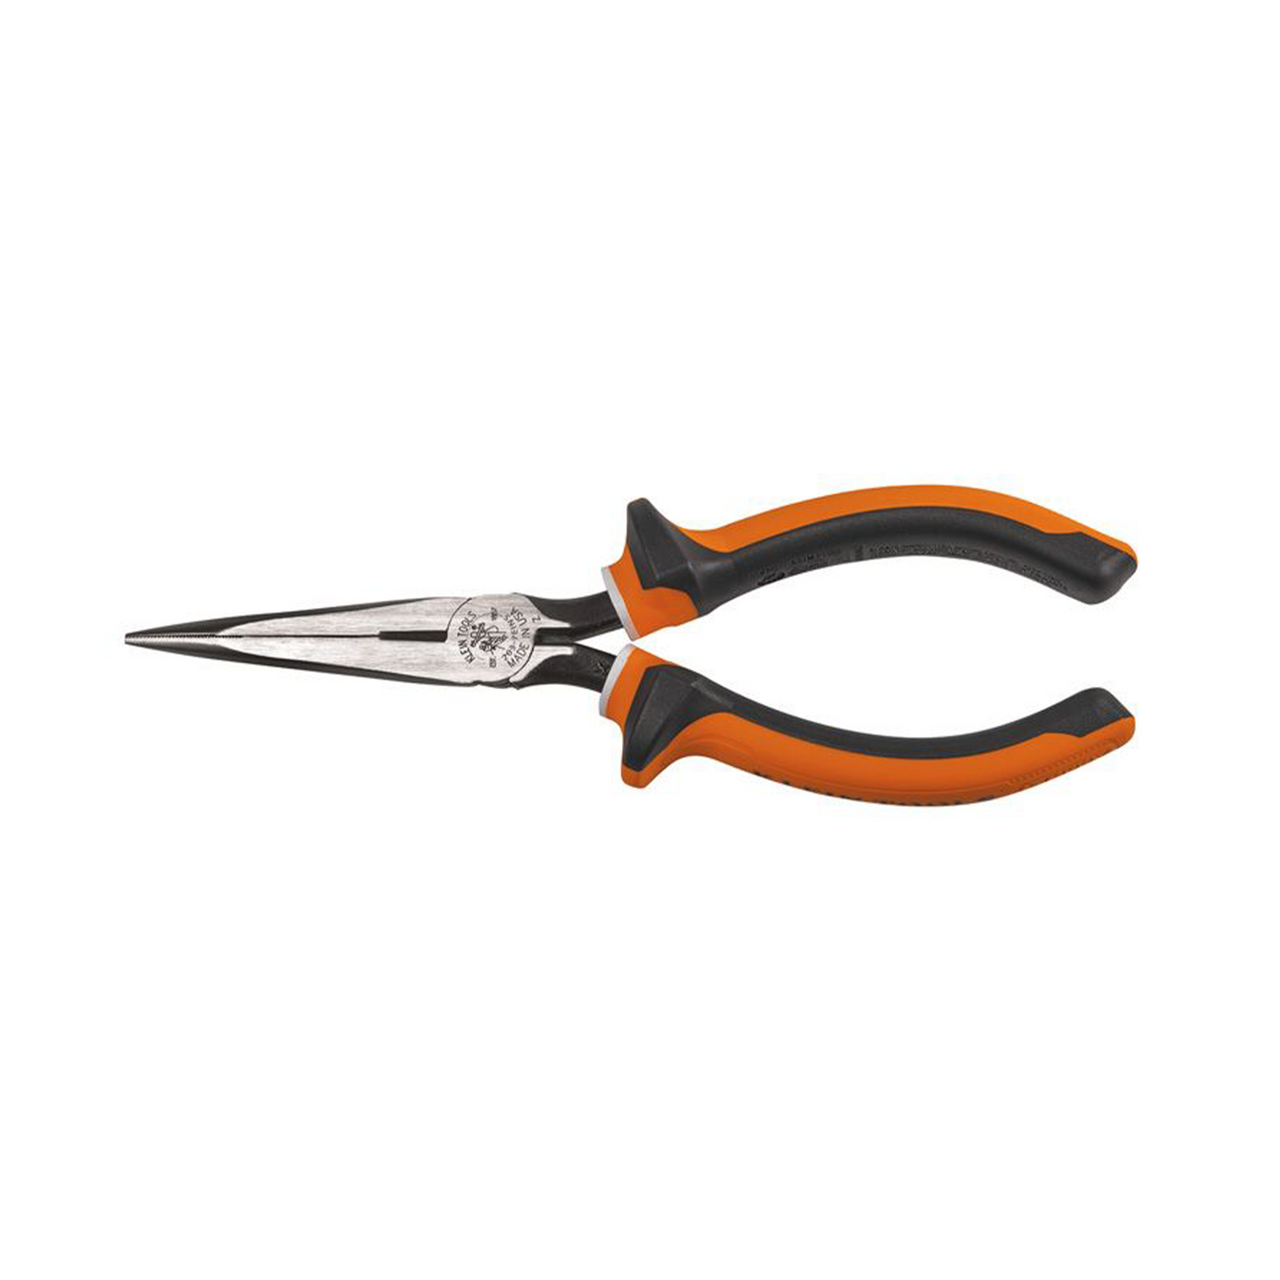 NEW! KLEIN TOOLS 6 STANDARD LONG NOSE SIDE-CUTTING PLIERS, D203-6